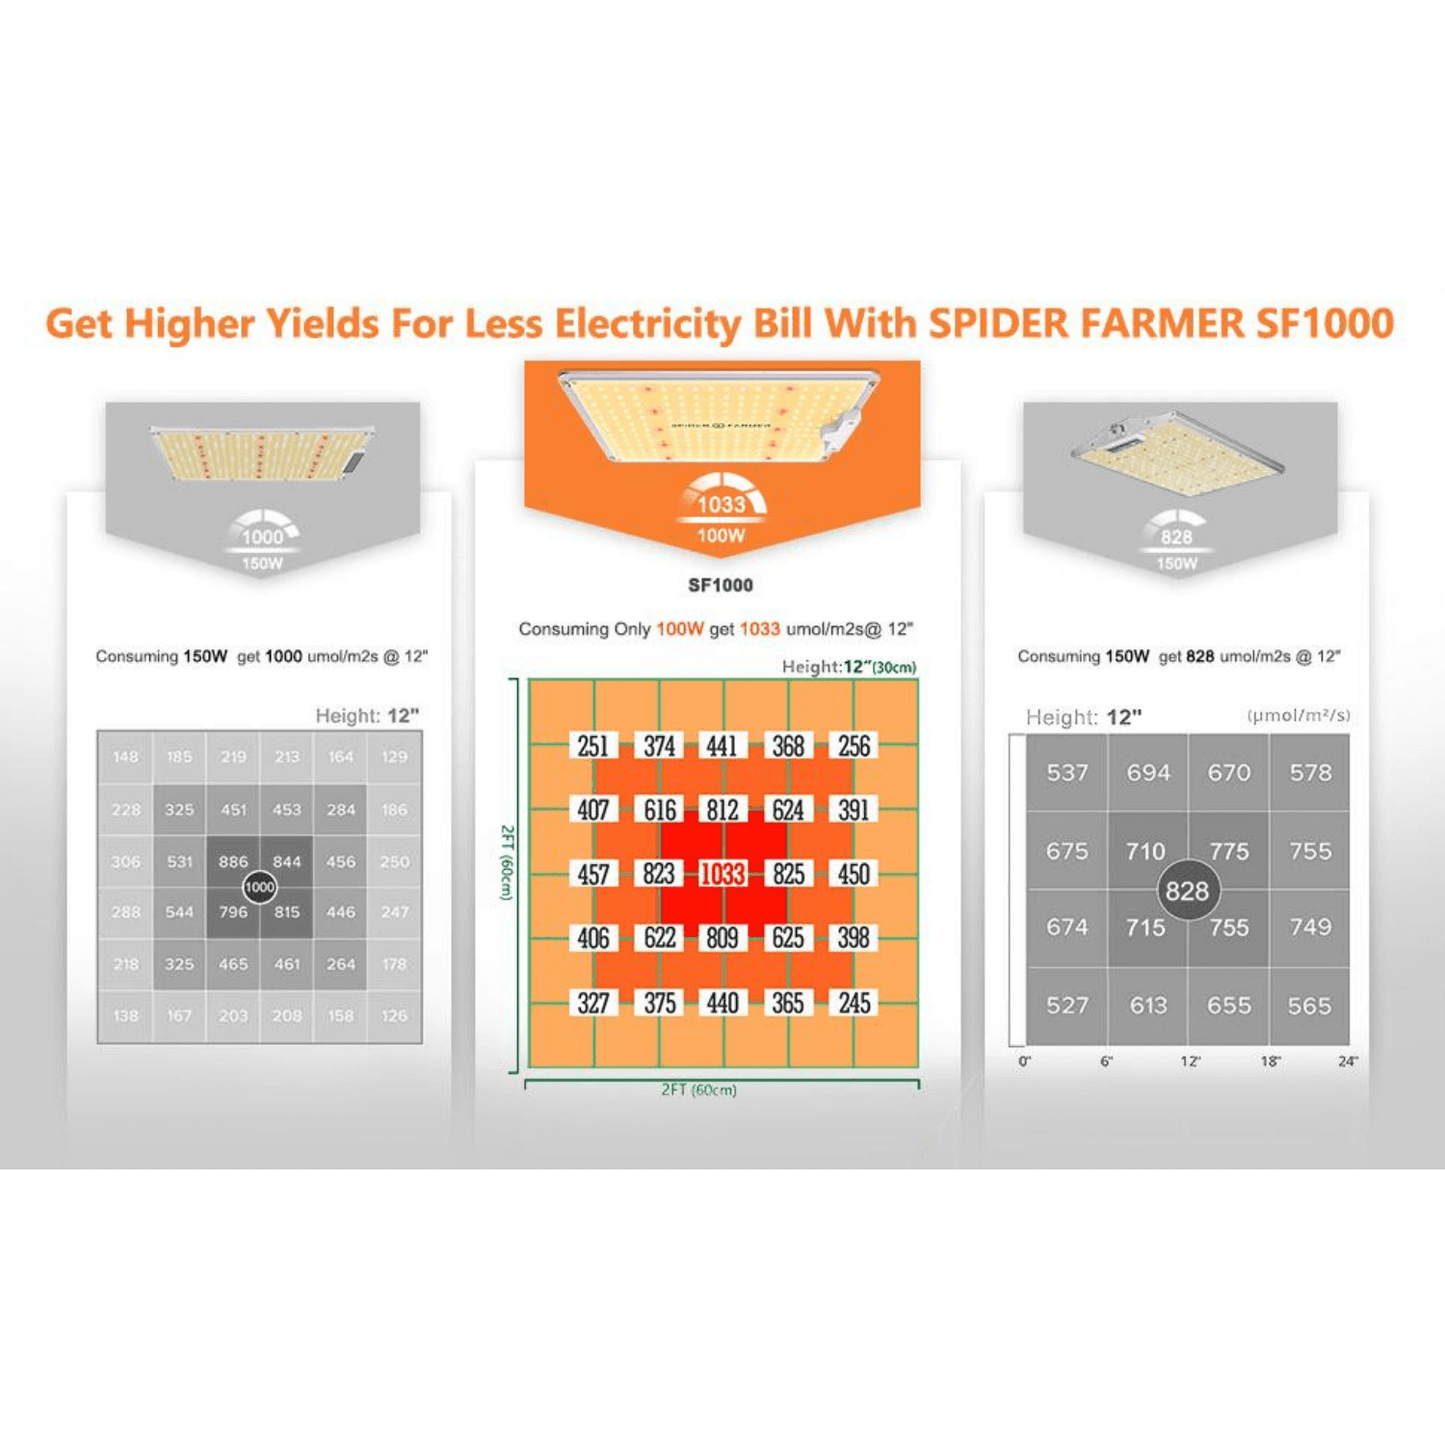 Spider Farmer SF1000 LED Grow Light + 2' x 2' Grow Tent + Inline Fan Combo with Speed Controller SPIDER-SF-1000-SET Kits 0600740984211